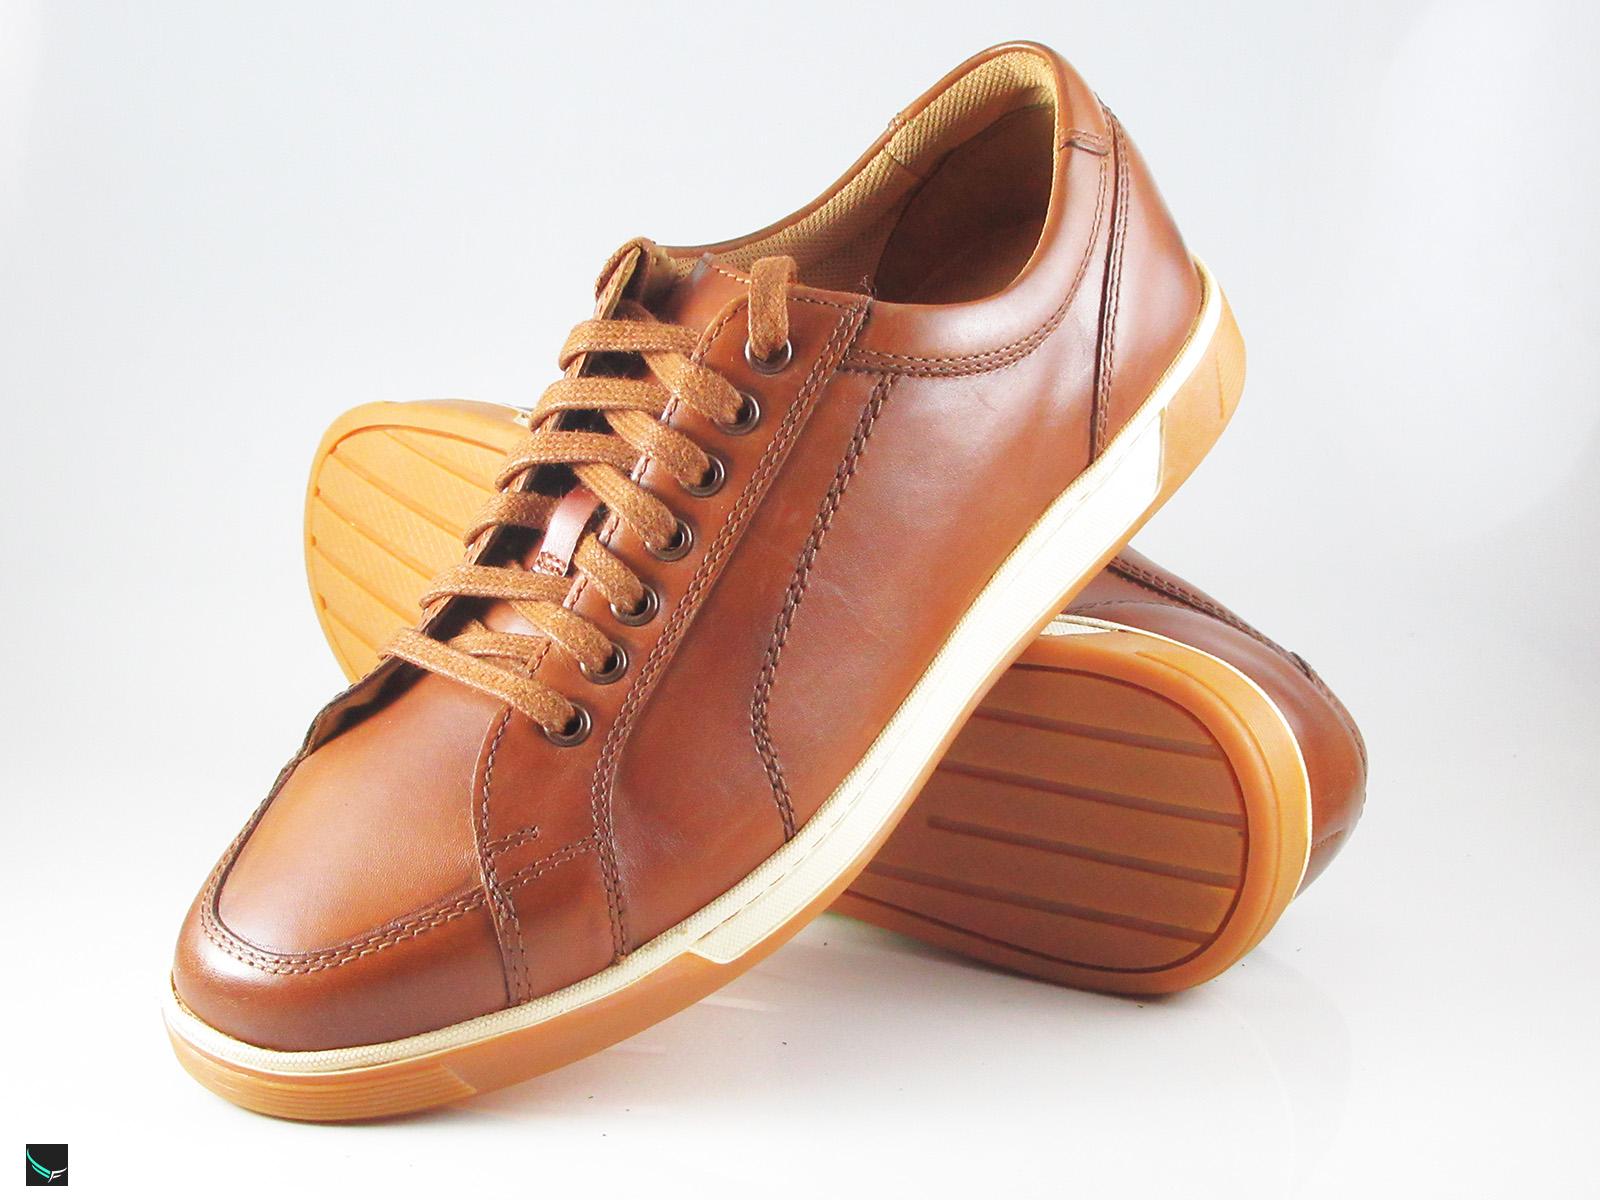 Men's Leather Sneakers - 4499 - Leather Collections On Frostfreak.com